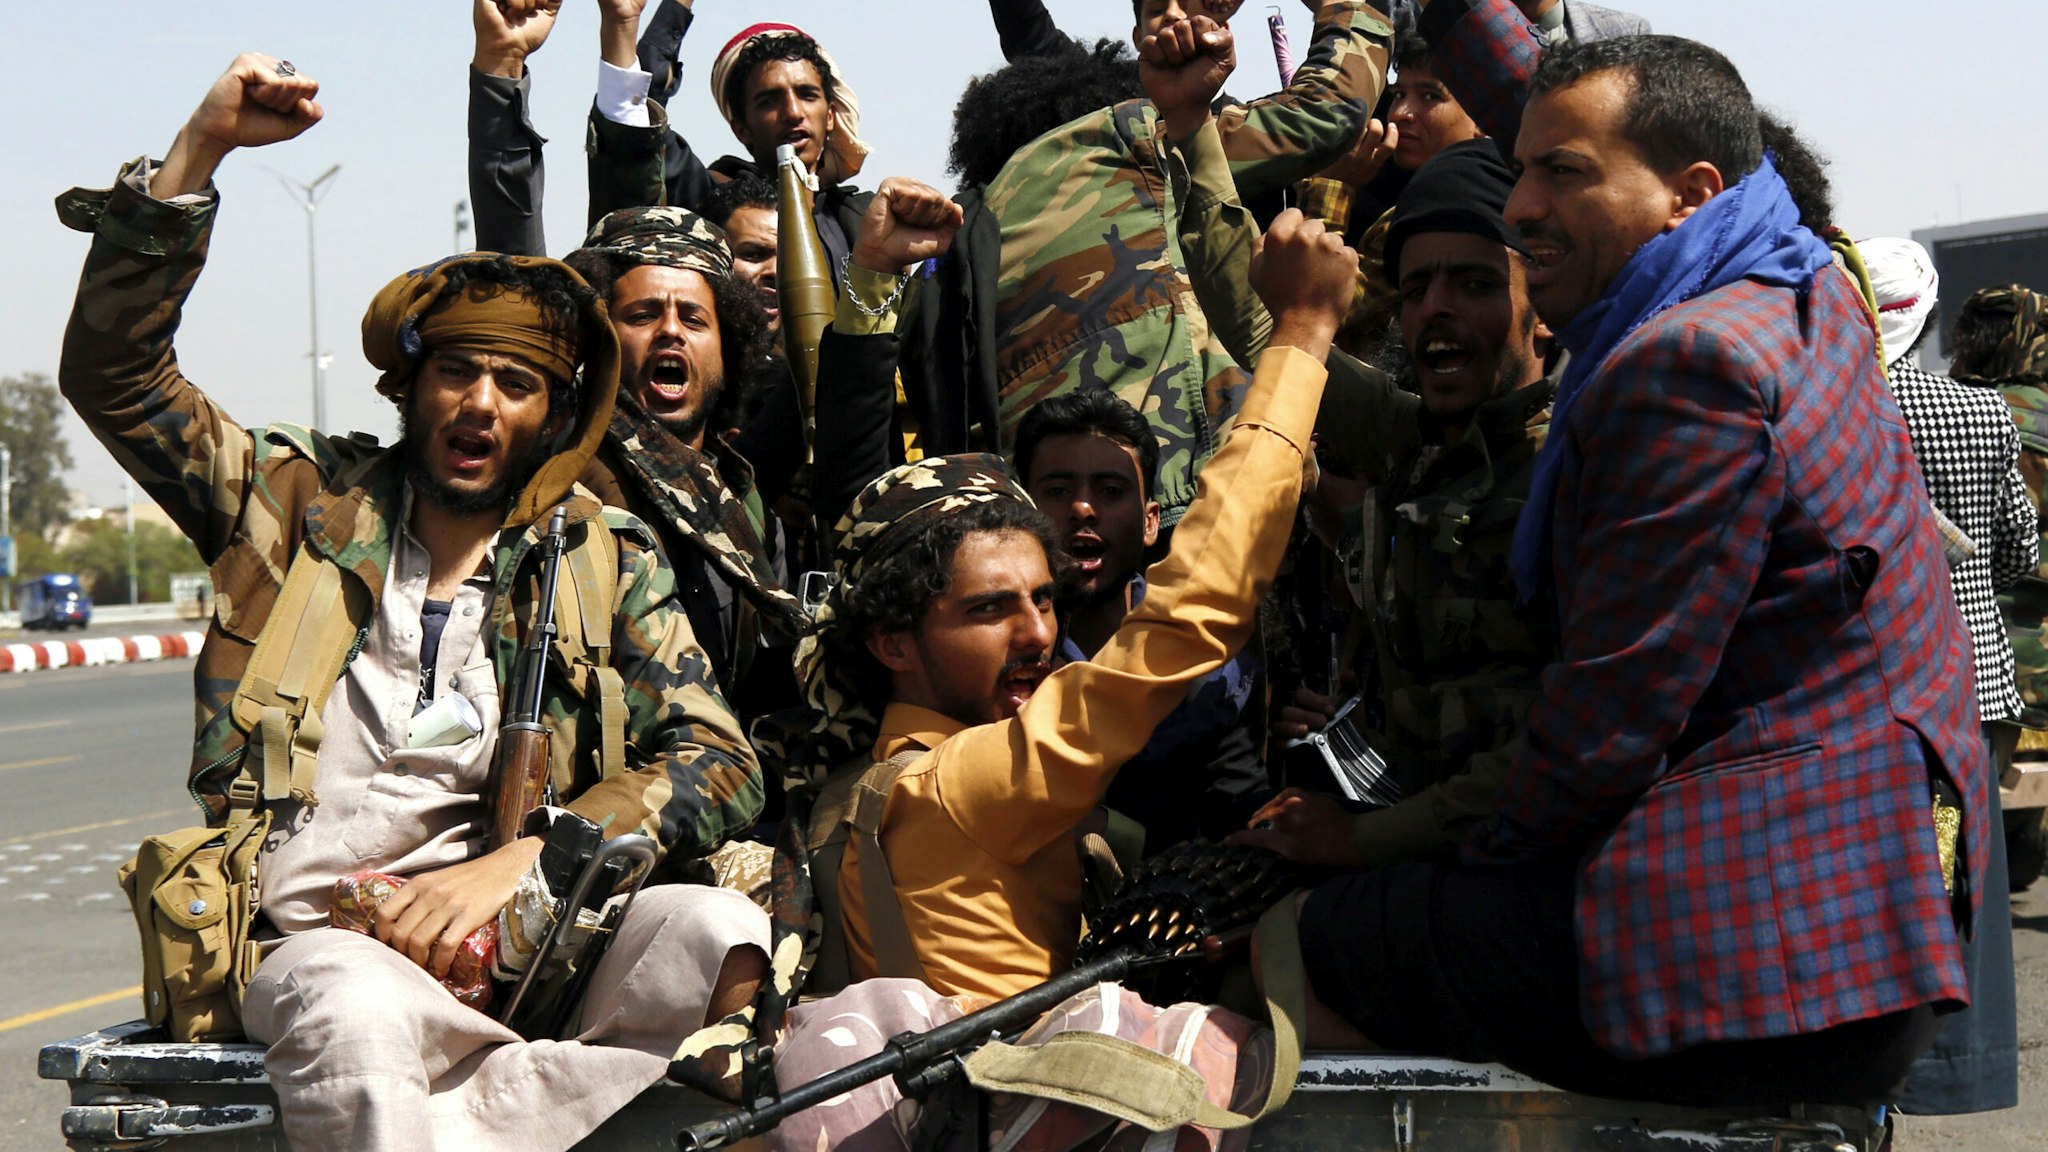 SANA'A, YEMEN - MARCH 17: Yemen's Houthi supporters chant slogans while riding a vehicle following their participation in a funeral of fighters killed during the ongoing battles between the Iran-allied Houthi movement fighters and forces of the ousted government backed by the coalition led by Saudi Arabia, on March 17, 2022 in Sana'a, Yemen. Yemen's Houthi movement said on Wednesday it would welcome and is ready for talks with the Saudi-led coalition and their Yemeni allies but in a neutral nation not in Riyadh as the Saudi-based Gulf Cooperation Council announced, as they consider the coalition as a part of this war.